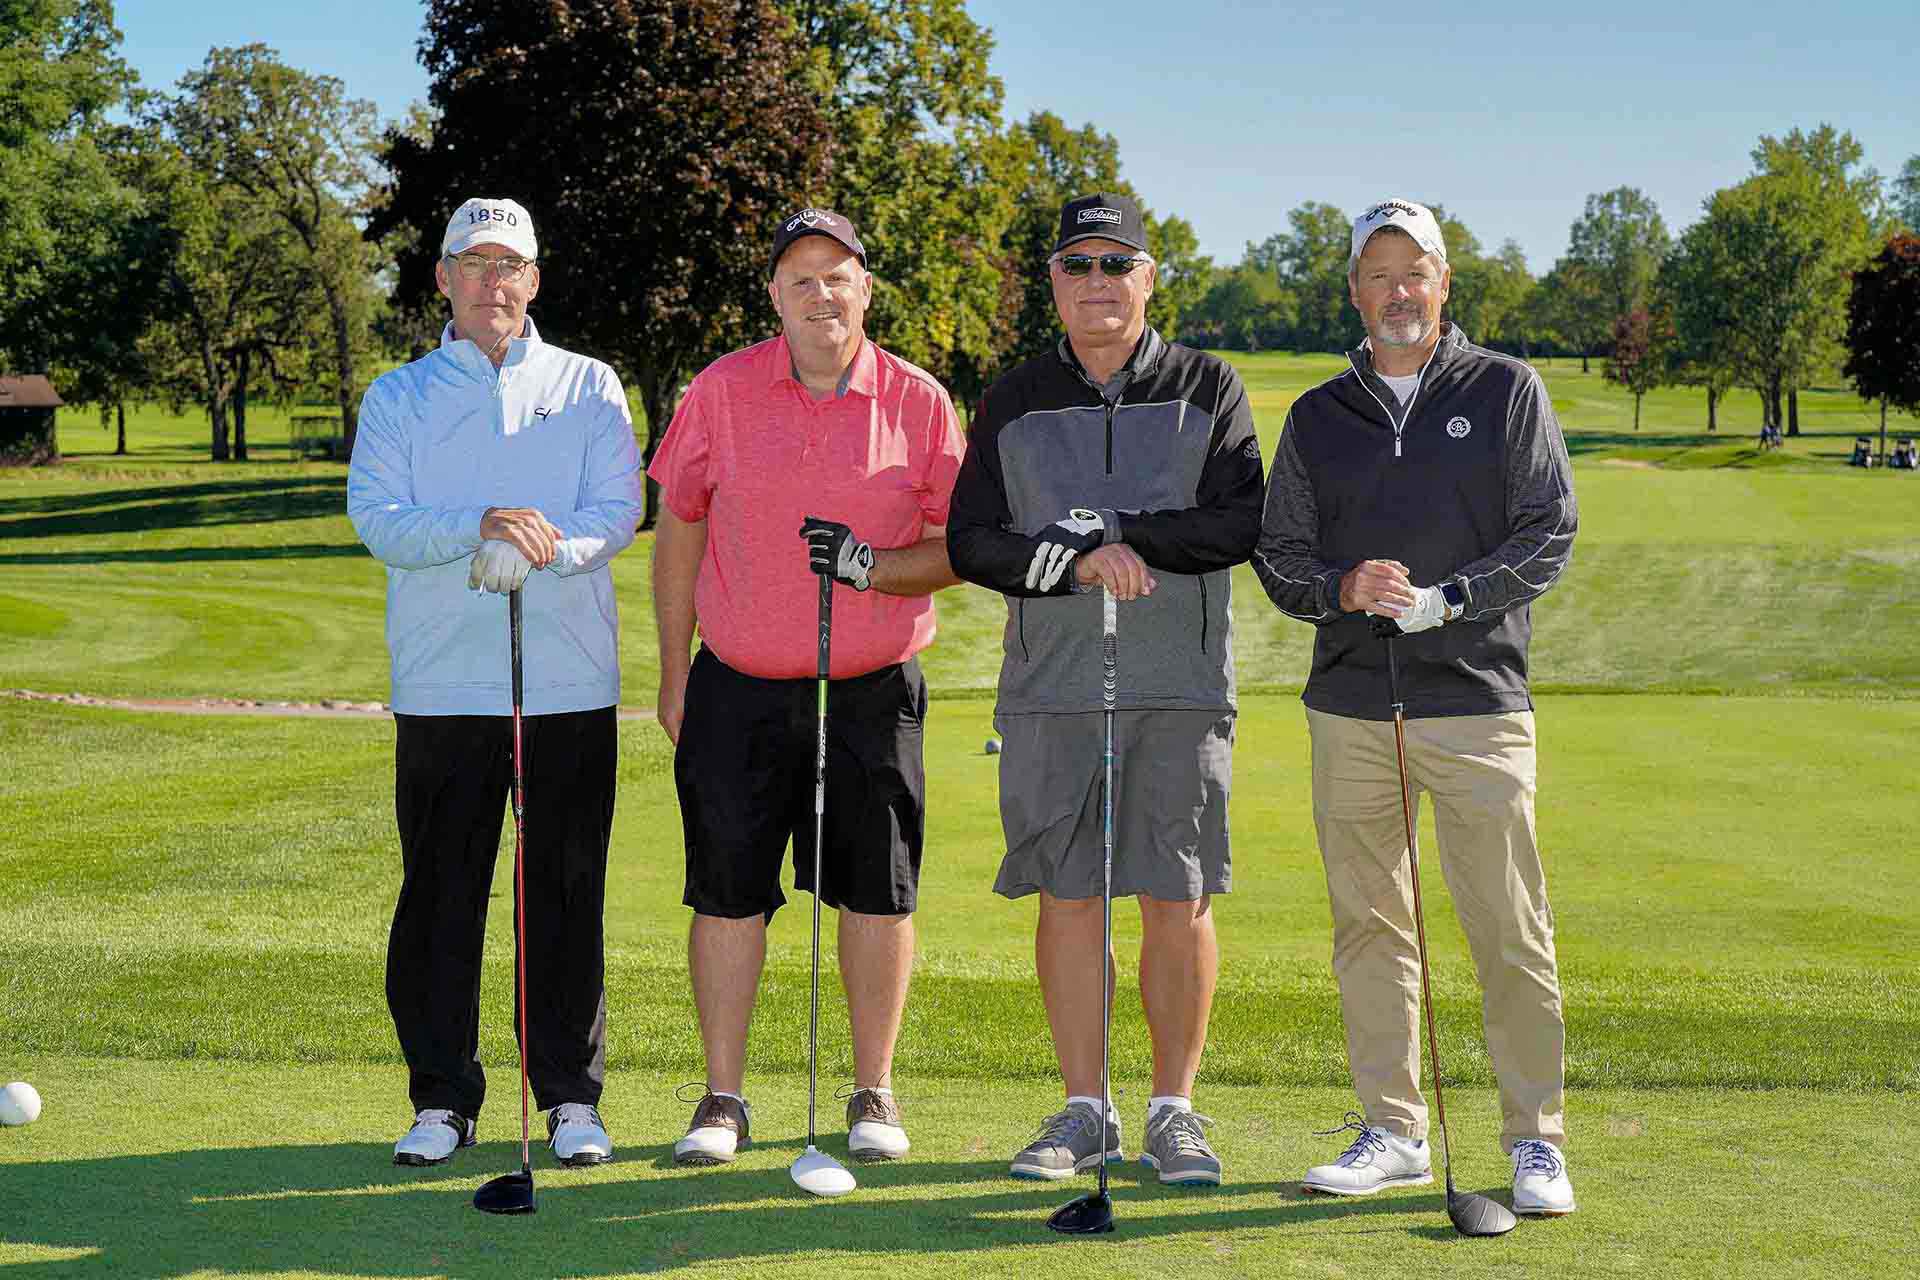 2020-endownment-classic-four-golfers-smile-on-golf-course